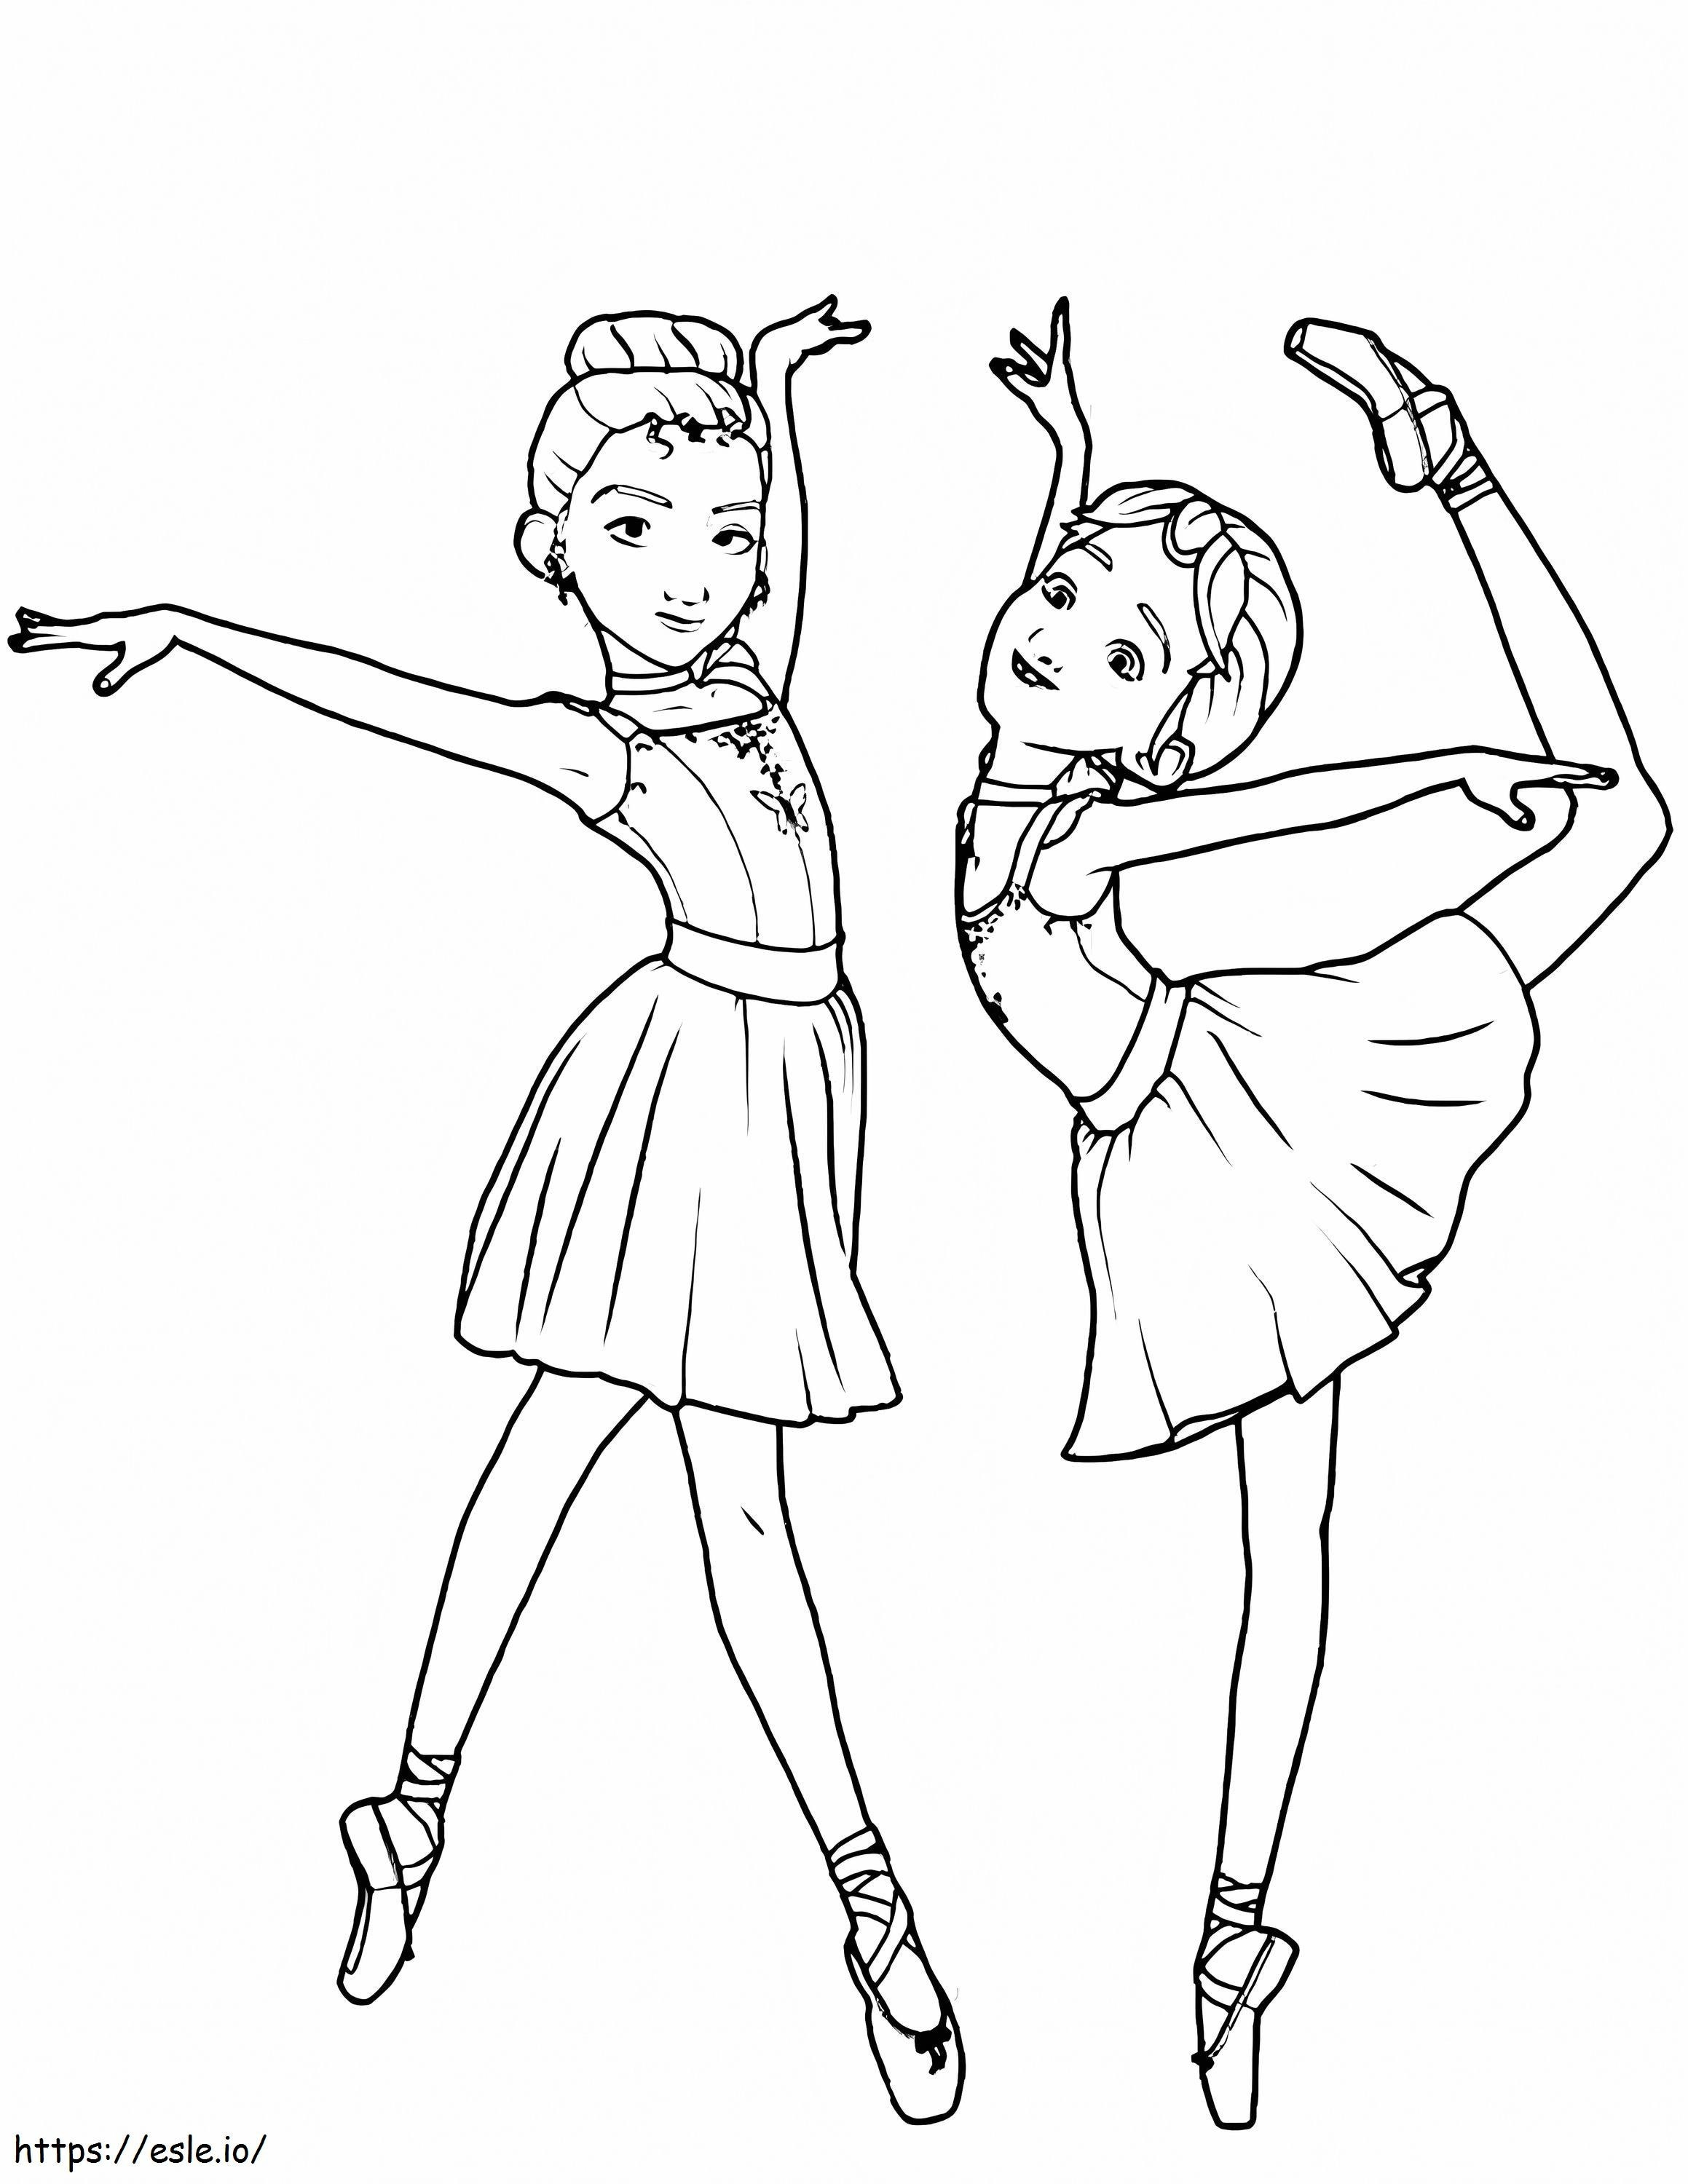 Lovely Ballerina coloring page